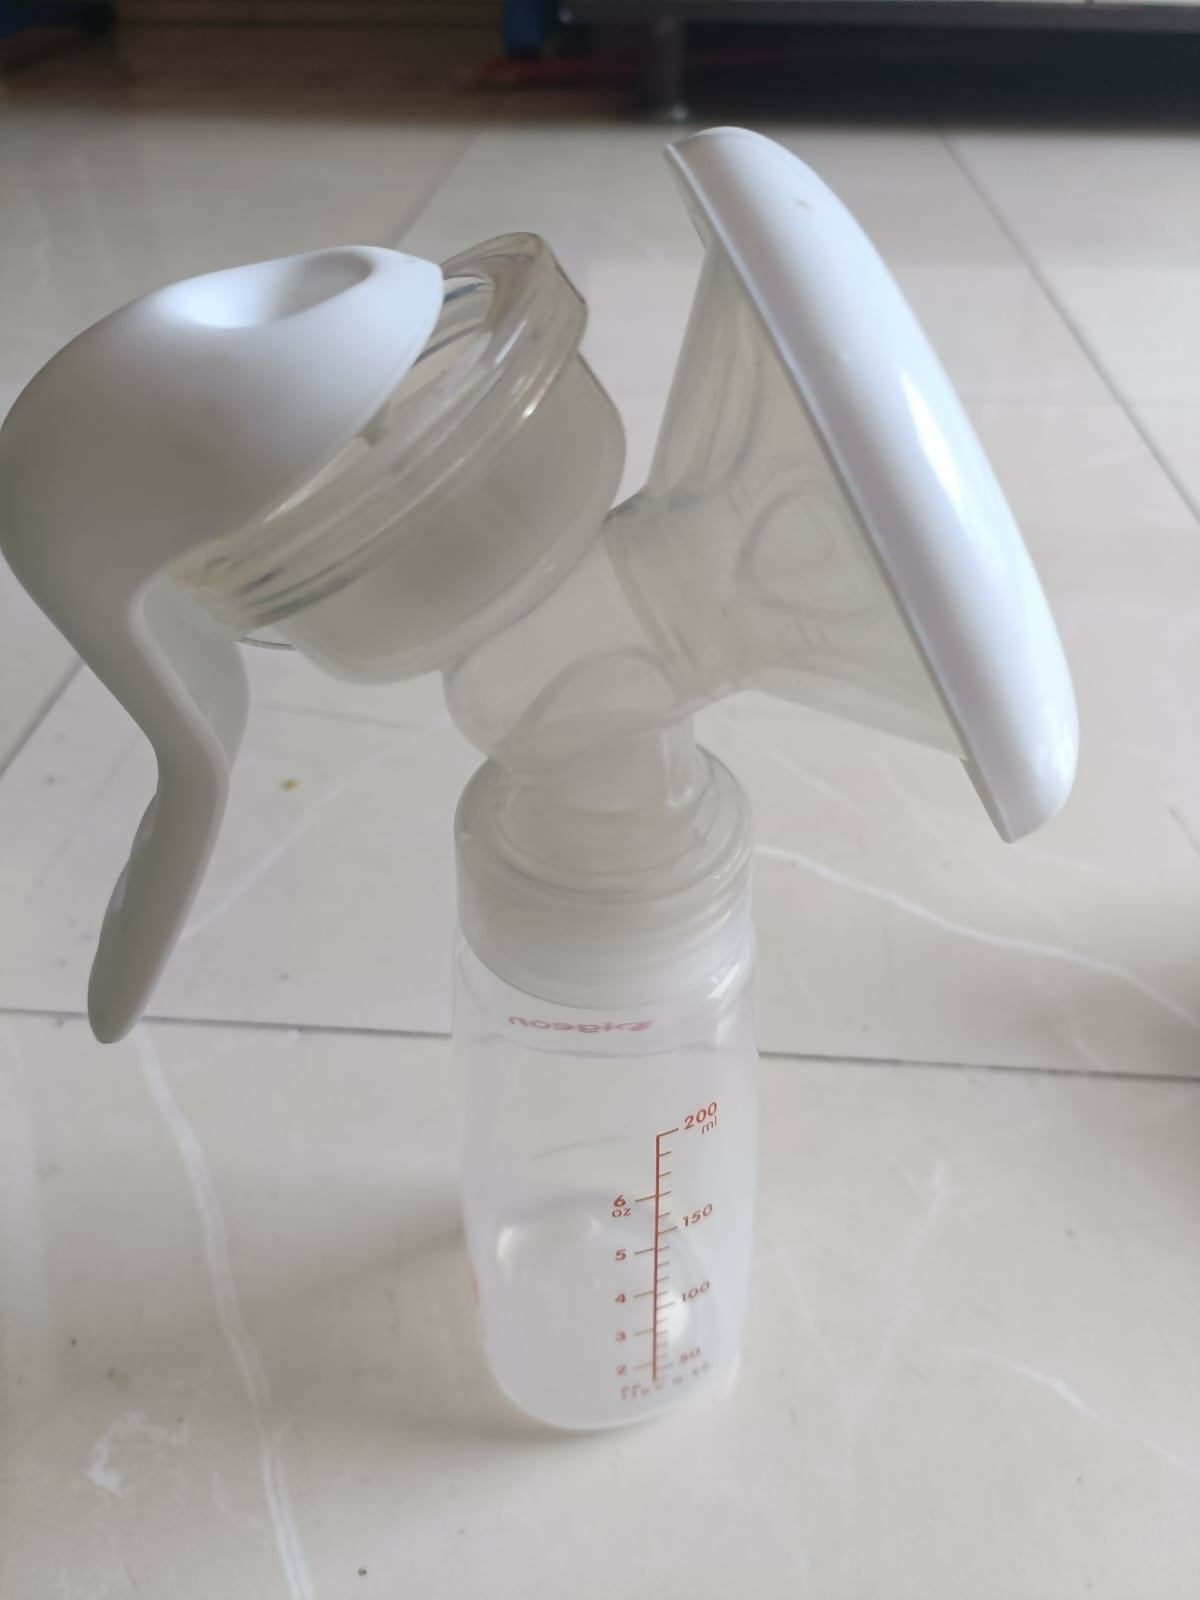 Efficient and comfortable milk expression with the PIGEON Baby Feeding Manual Pump, featuring gentle suction and ergonomic design for nursing mothers.